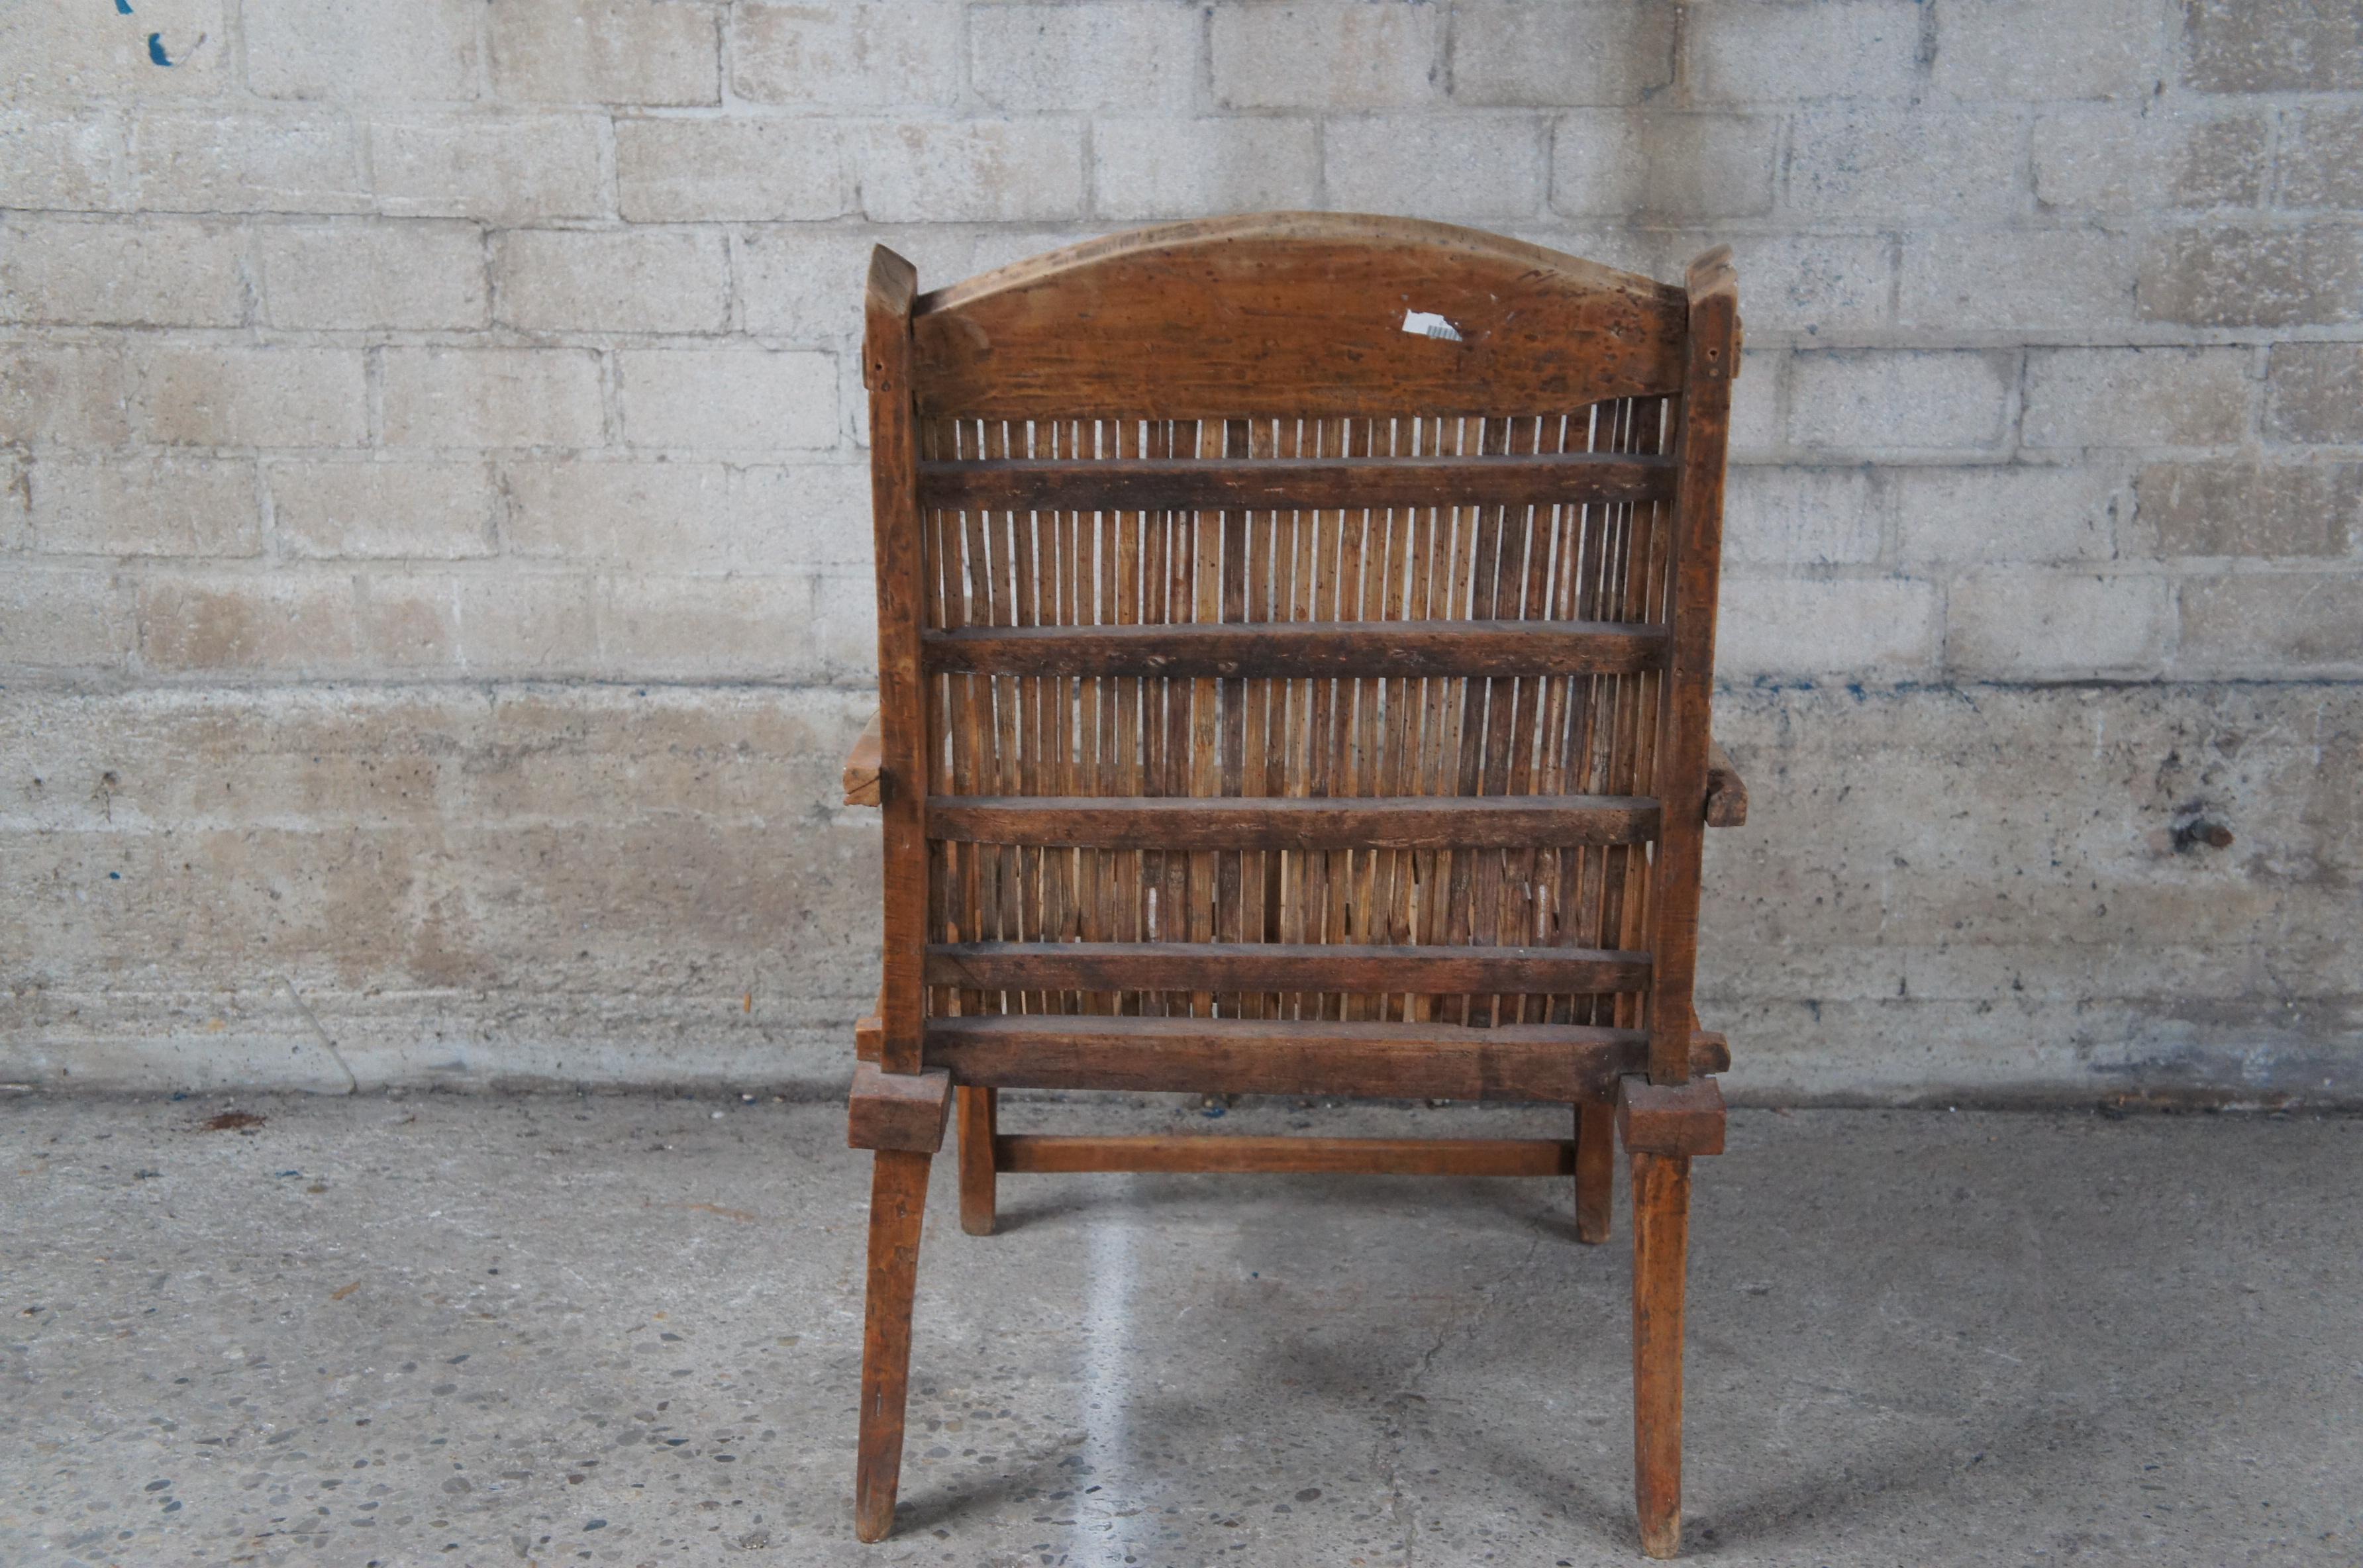 Antique British Colonial Anglo Indian Teak Split Reed Rattan Plantation Chair In Good Condition For Sale In Dayton, OH